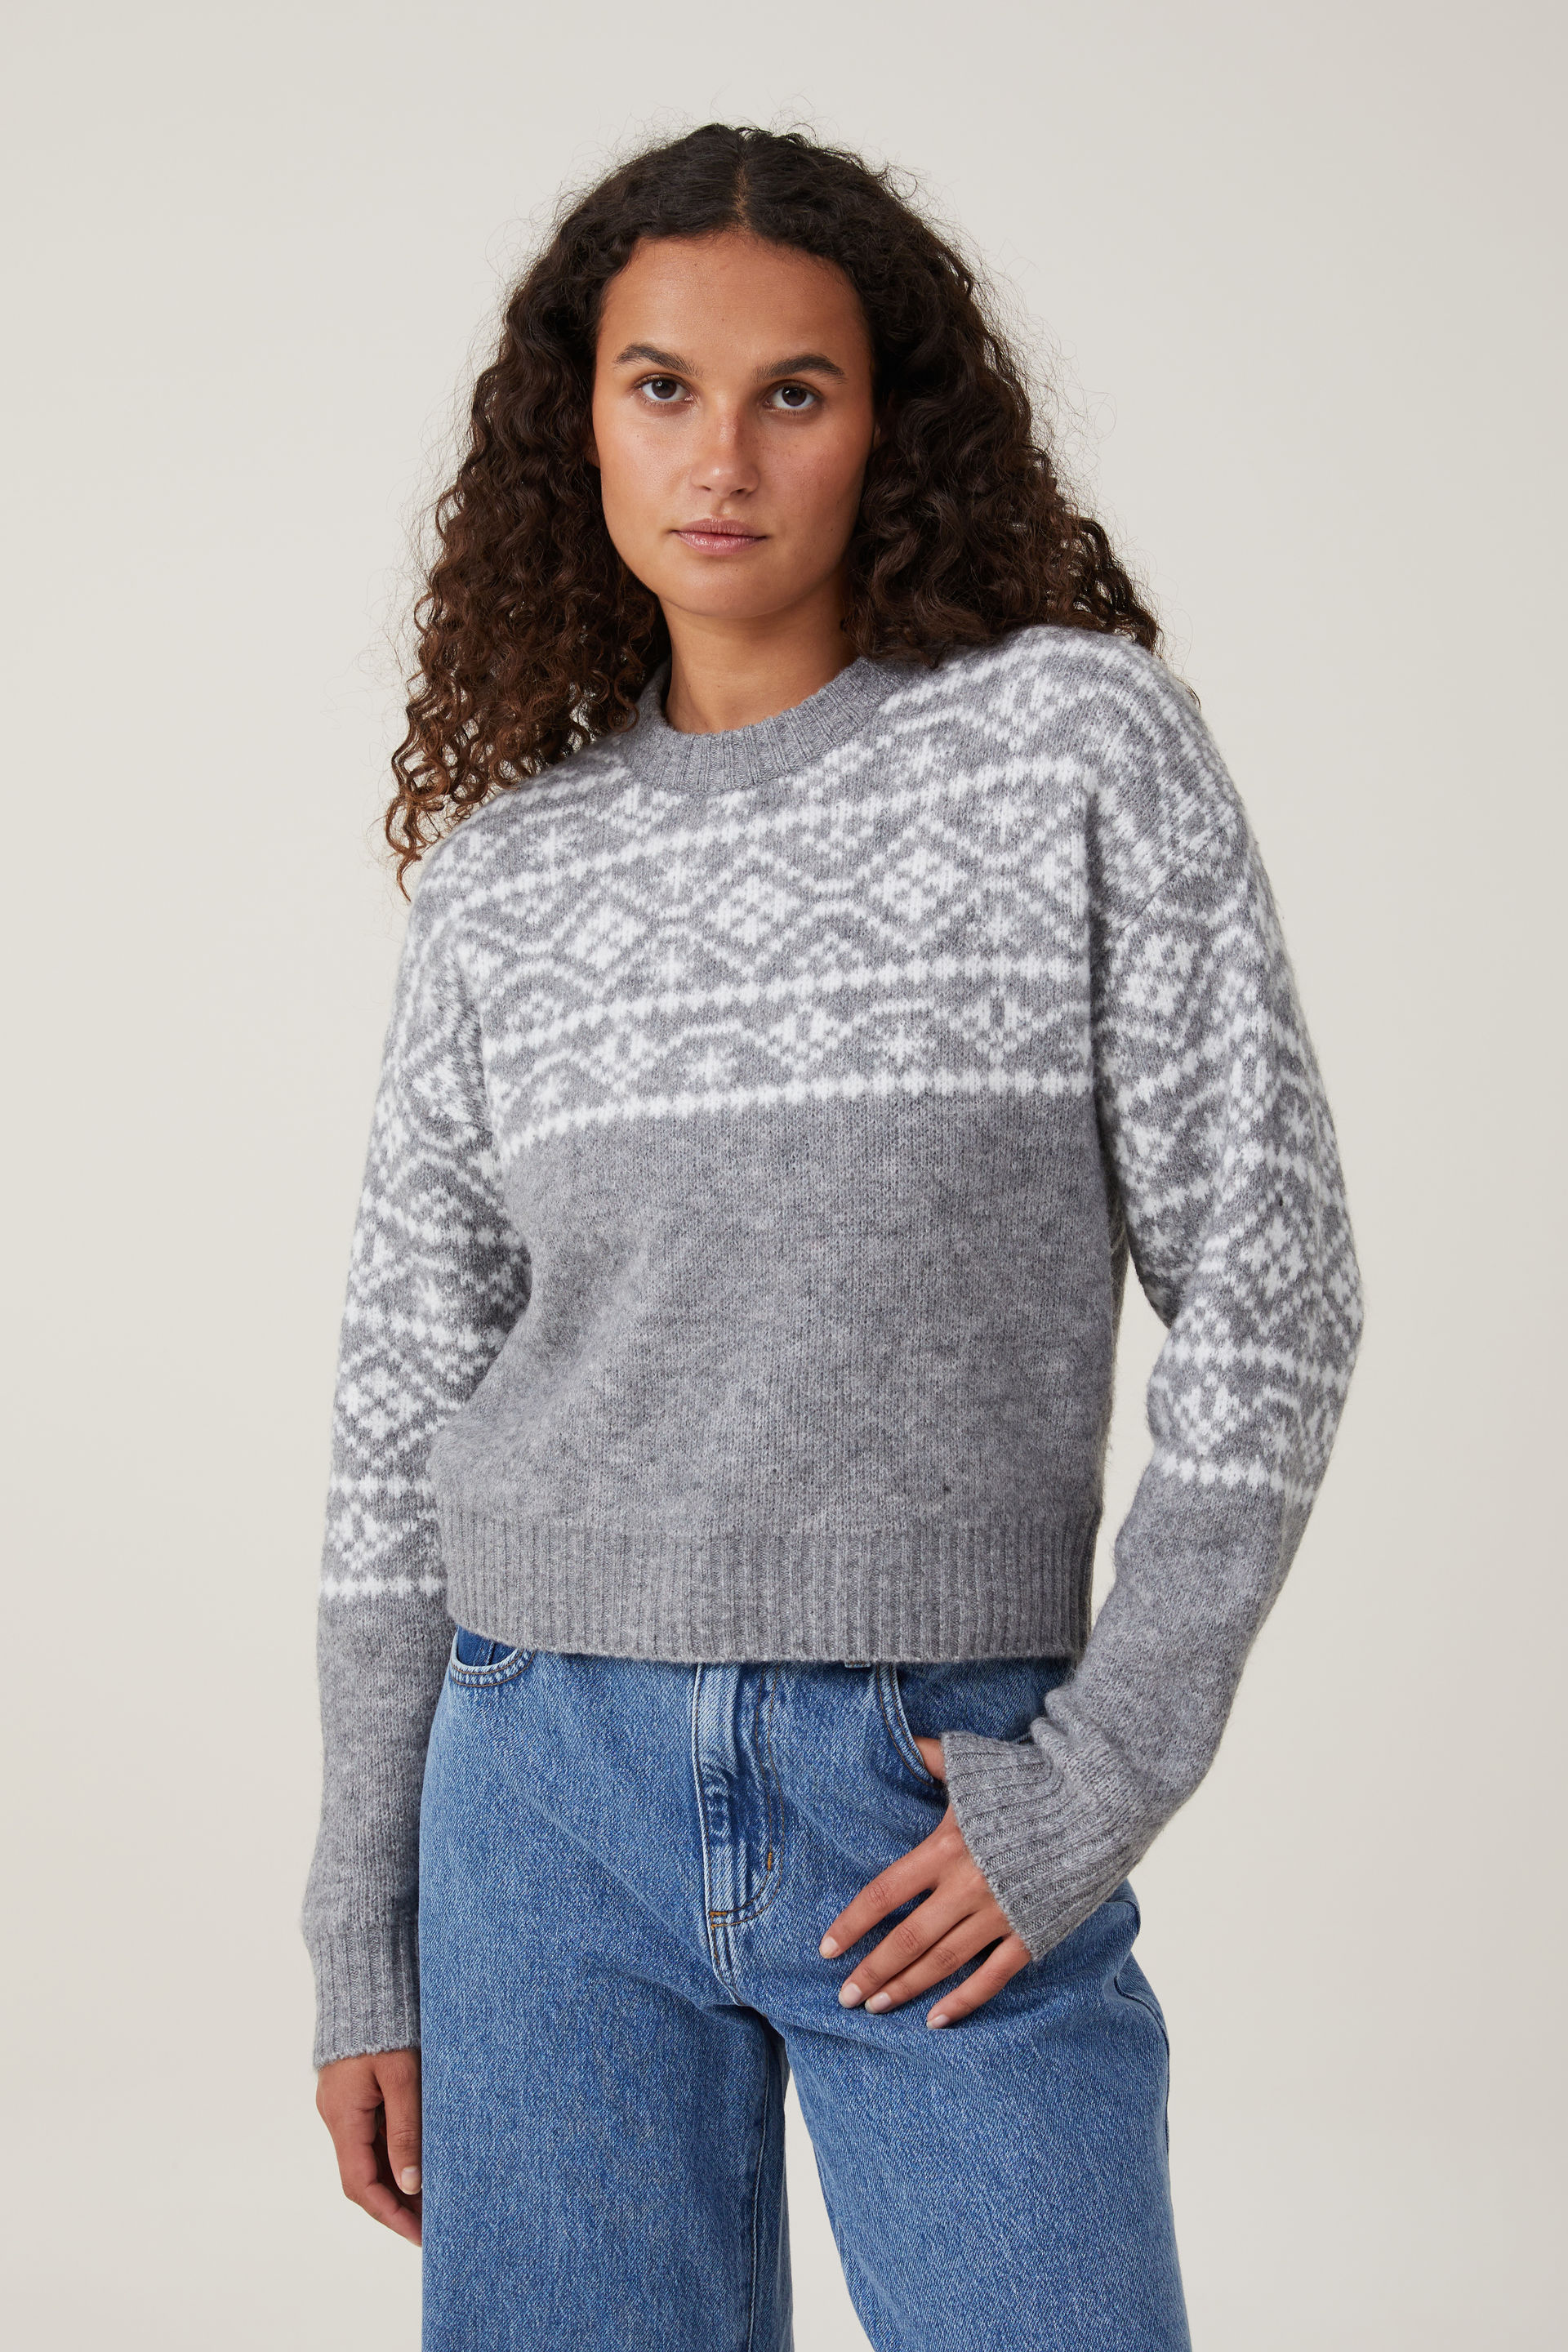 Cotton On Women - Everything Crew Neck Pullover - Grey shadow marle fair isle